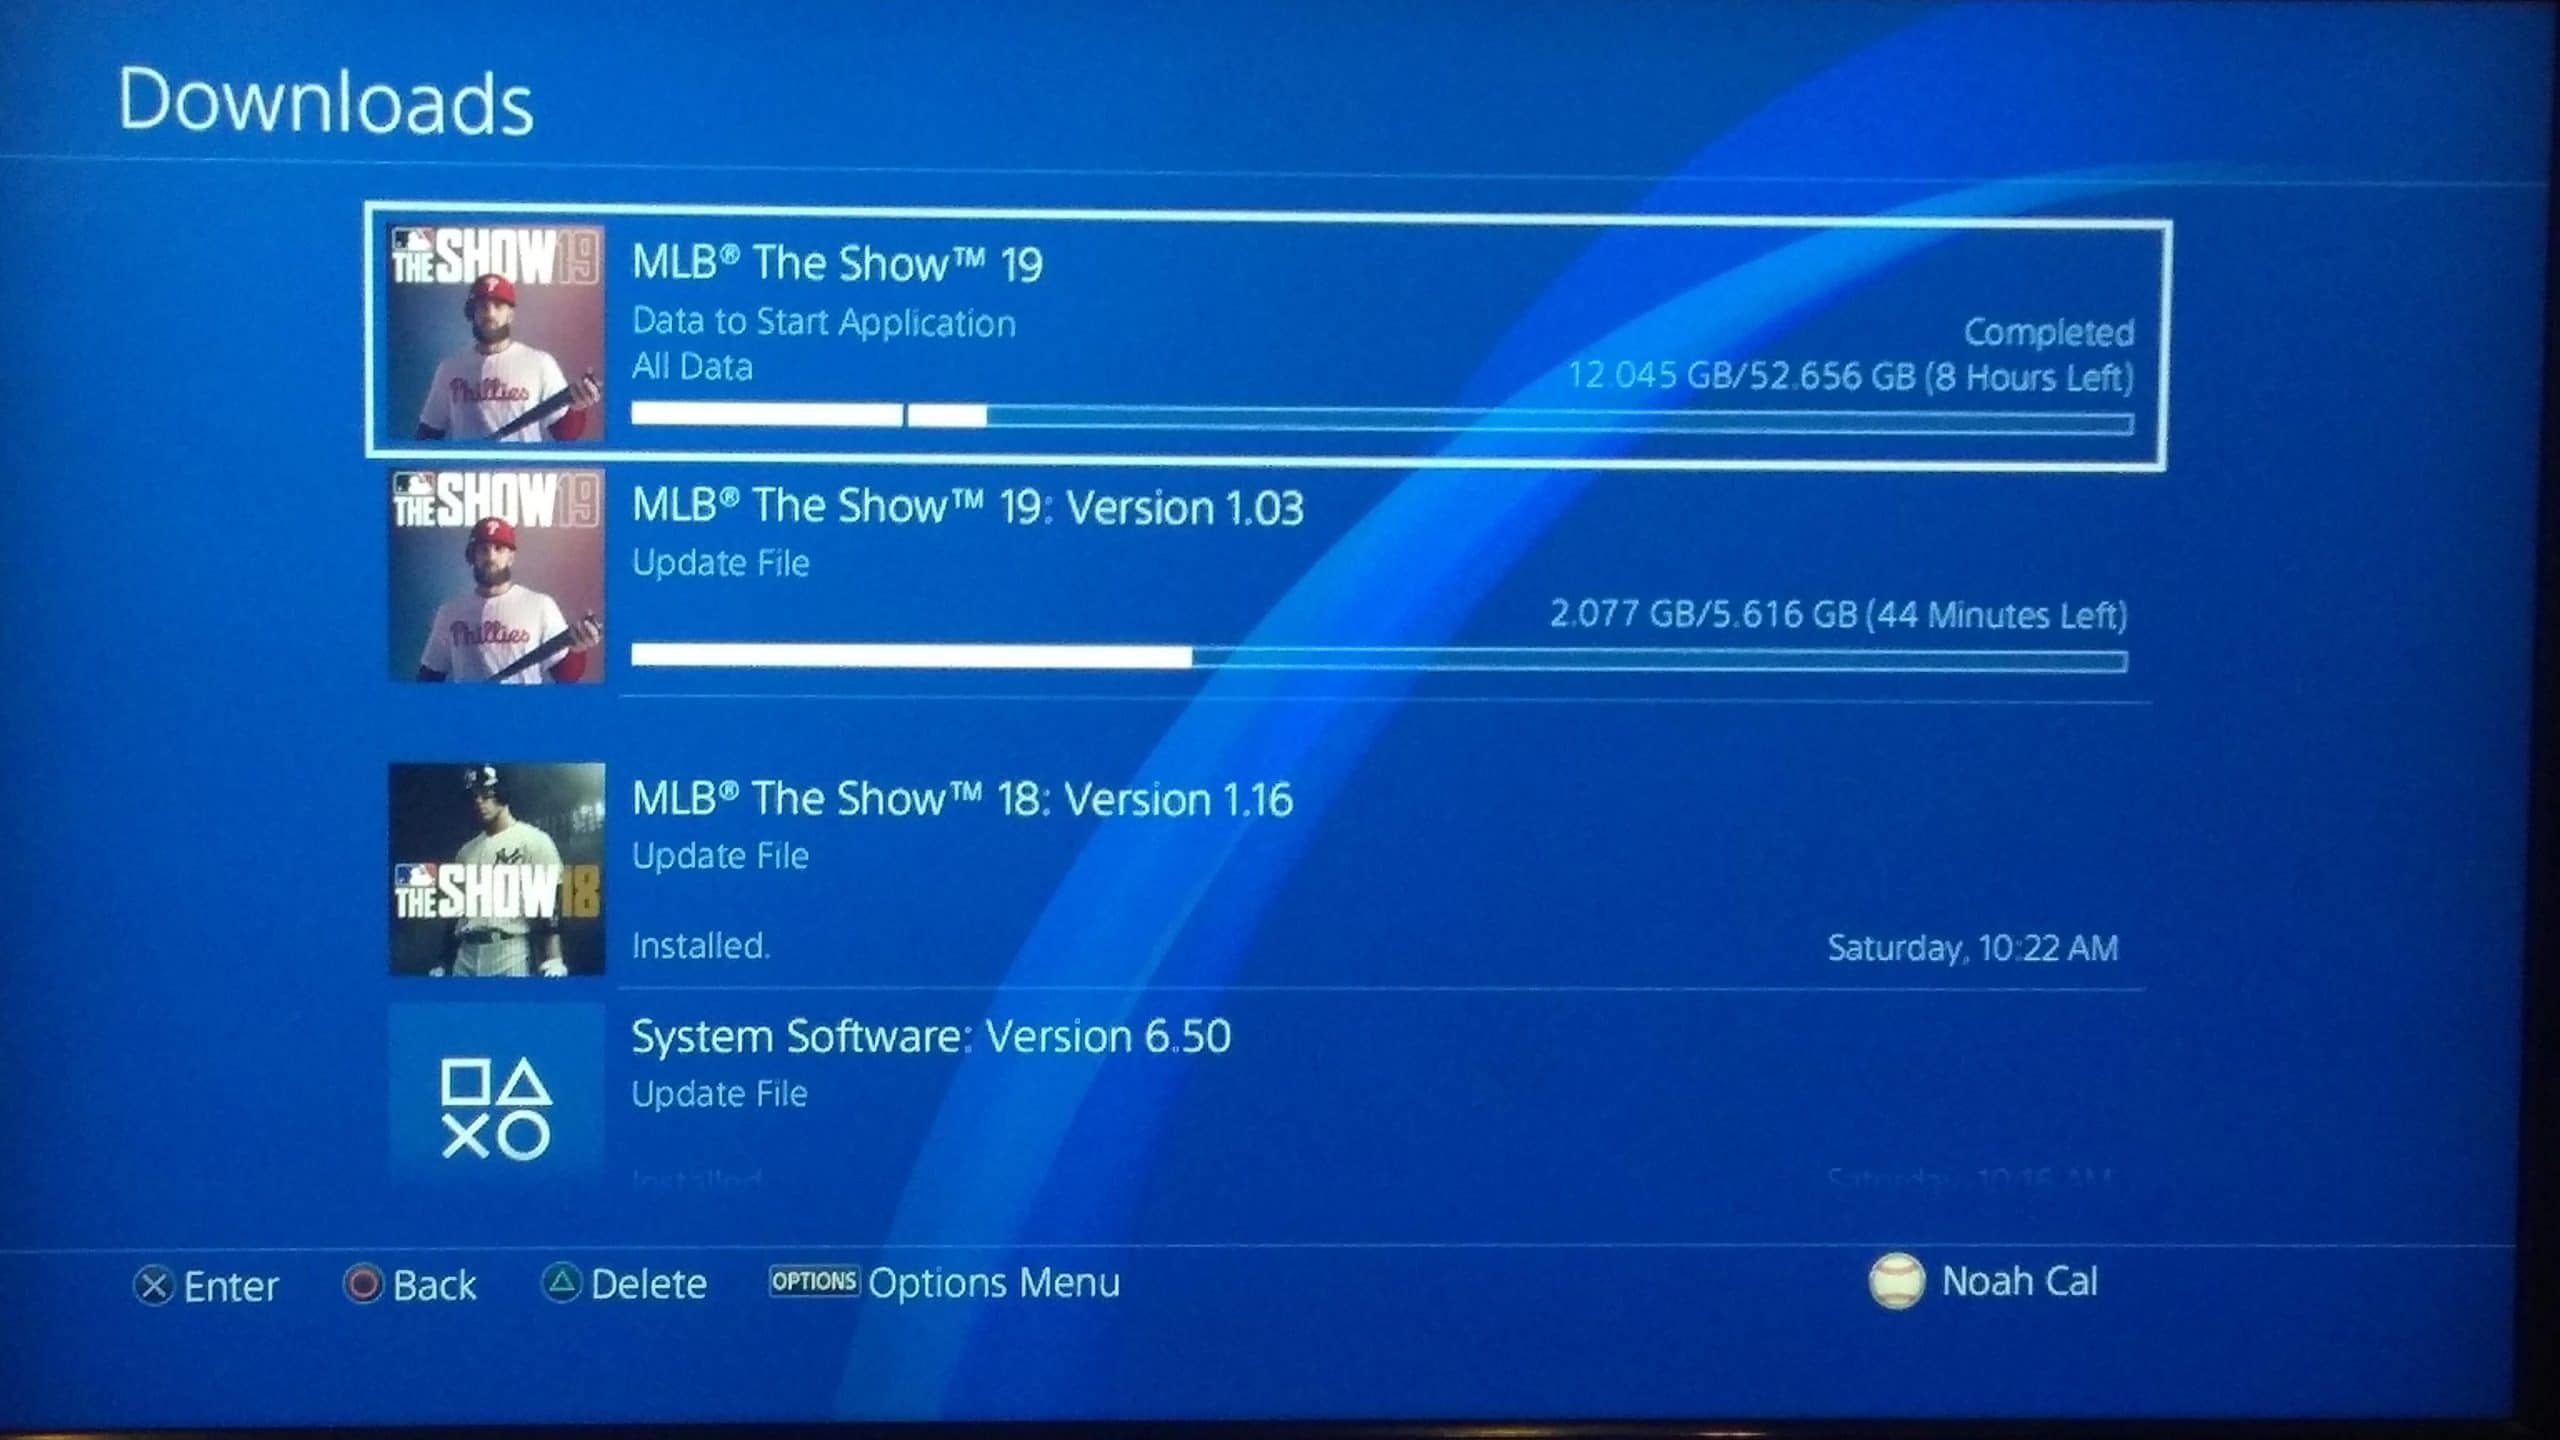 ps4 Pause other download tasks